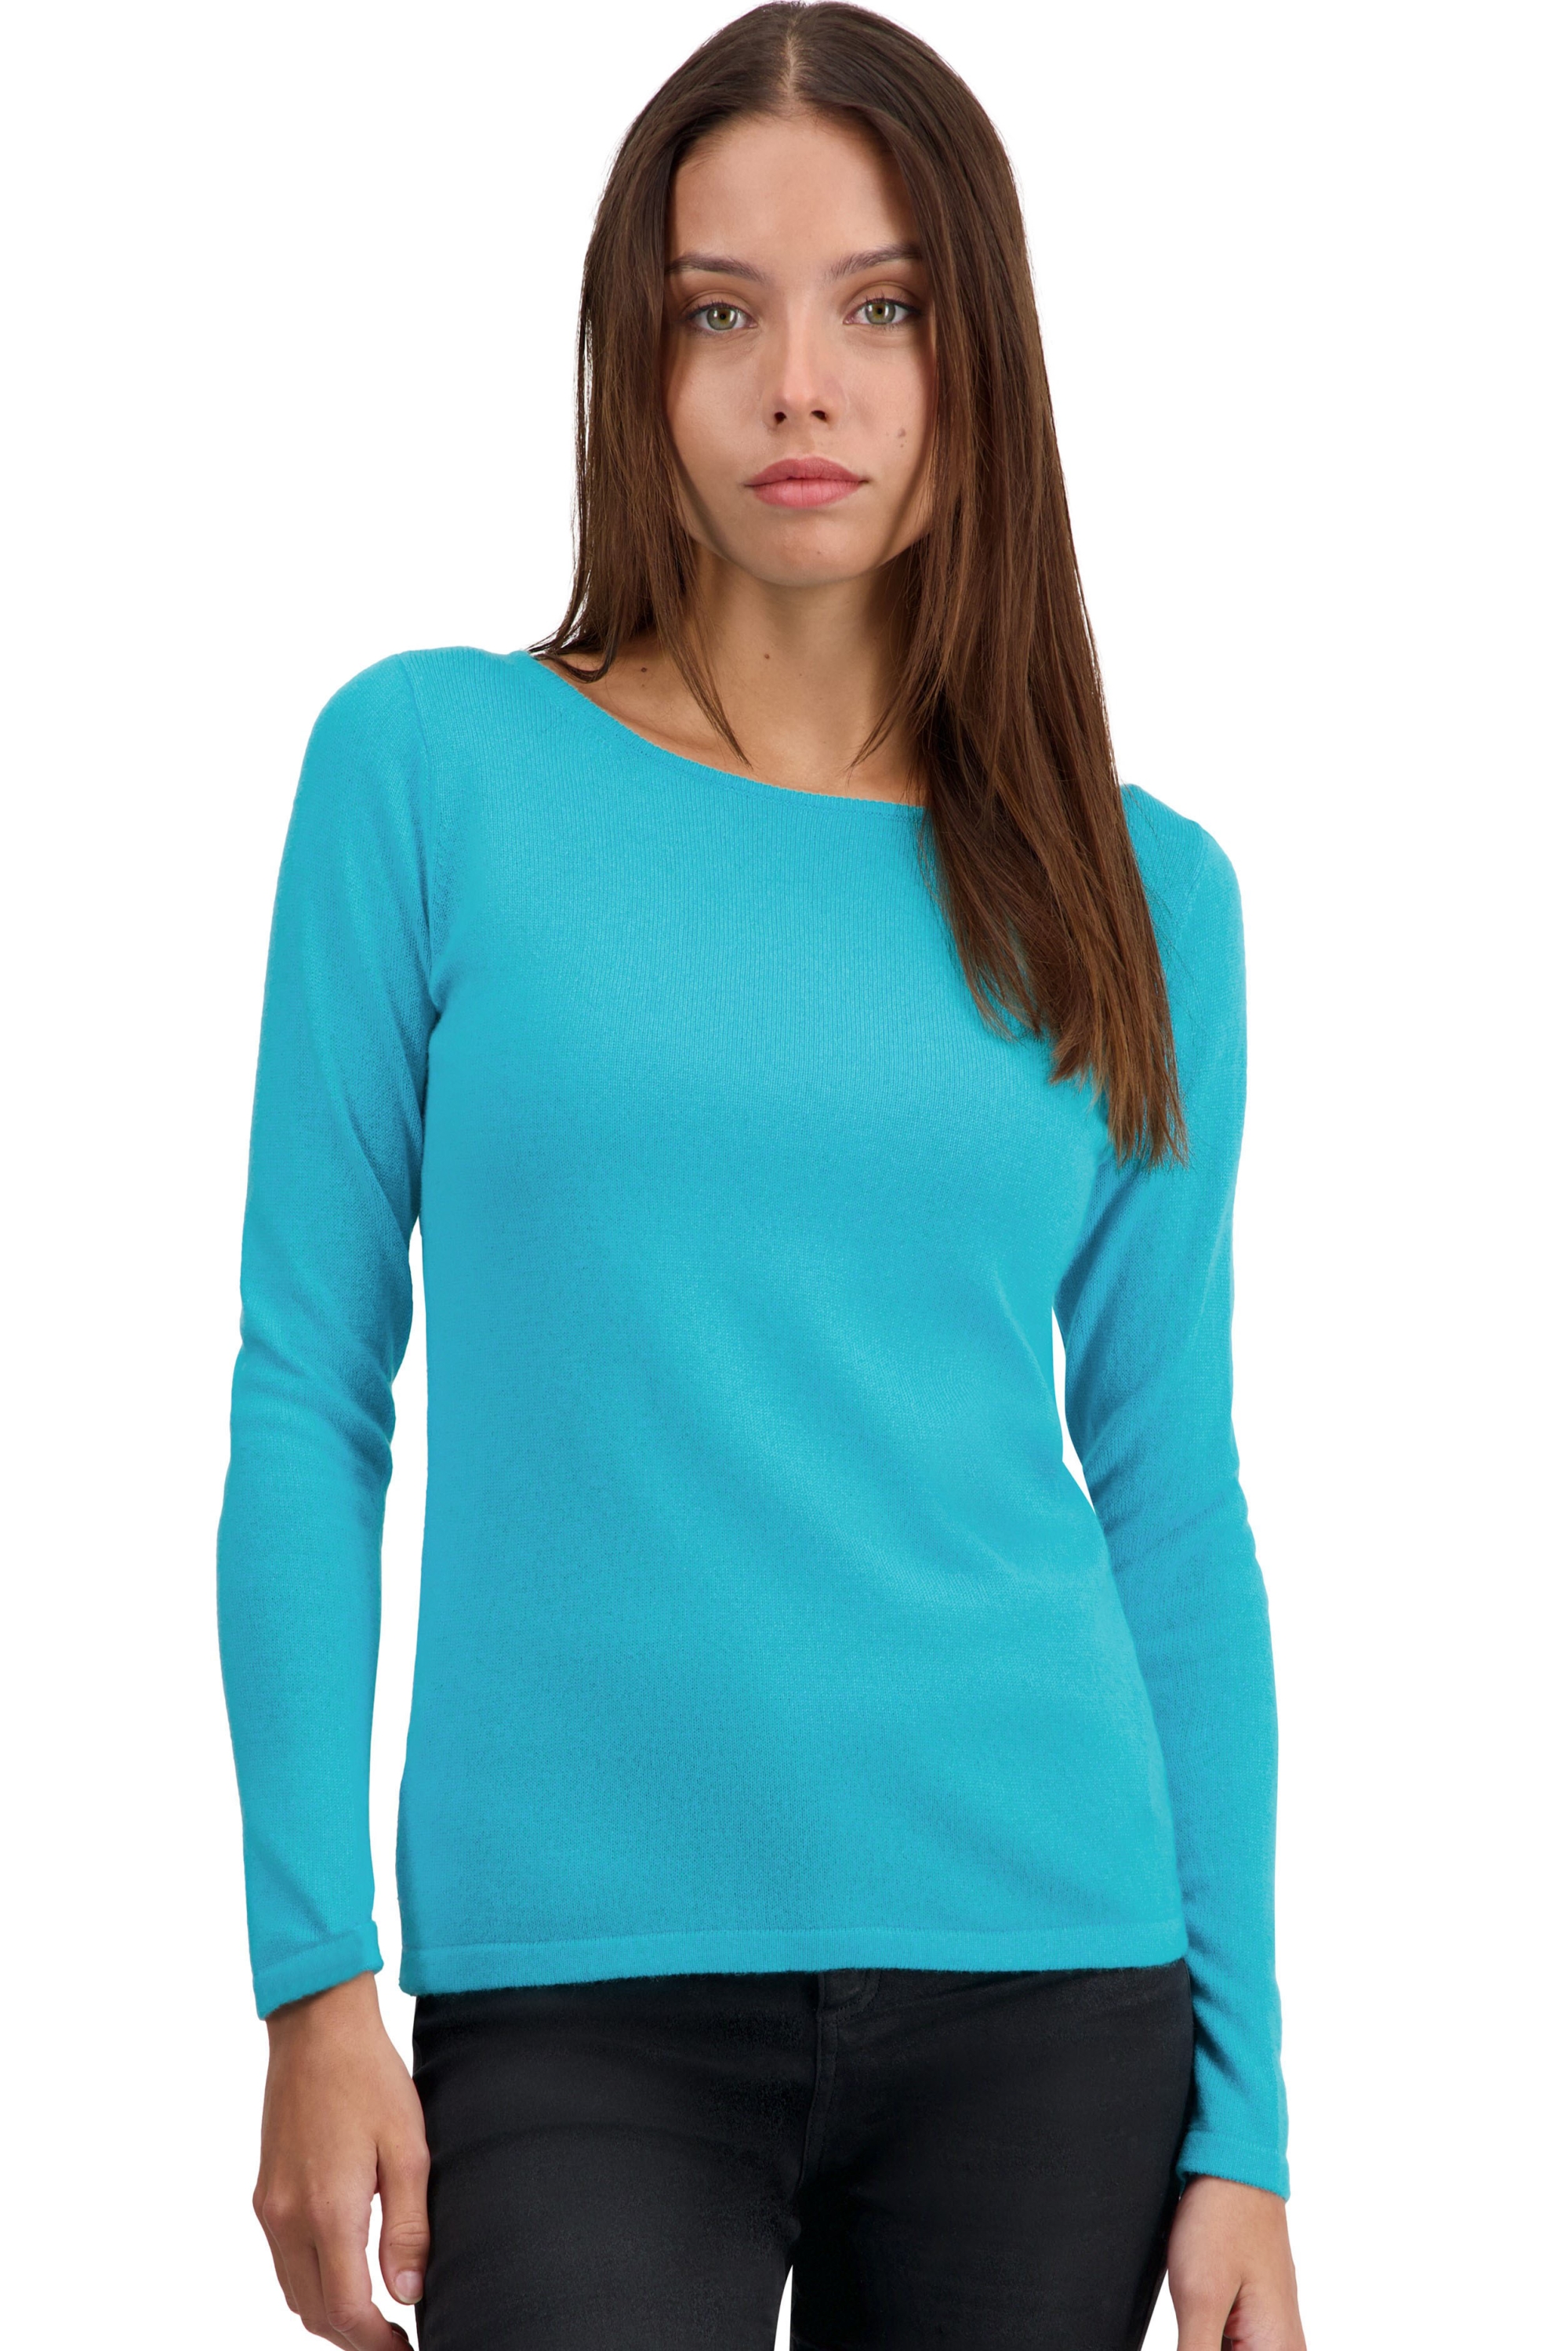 Cashmere ladies basic sweaters at low prices tennessy first kingfisher s